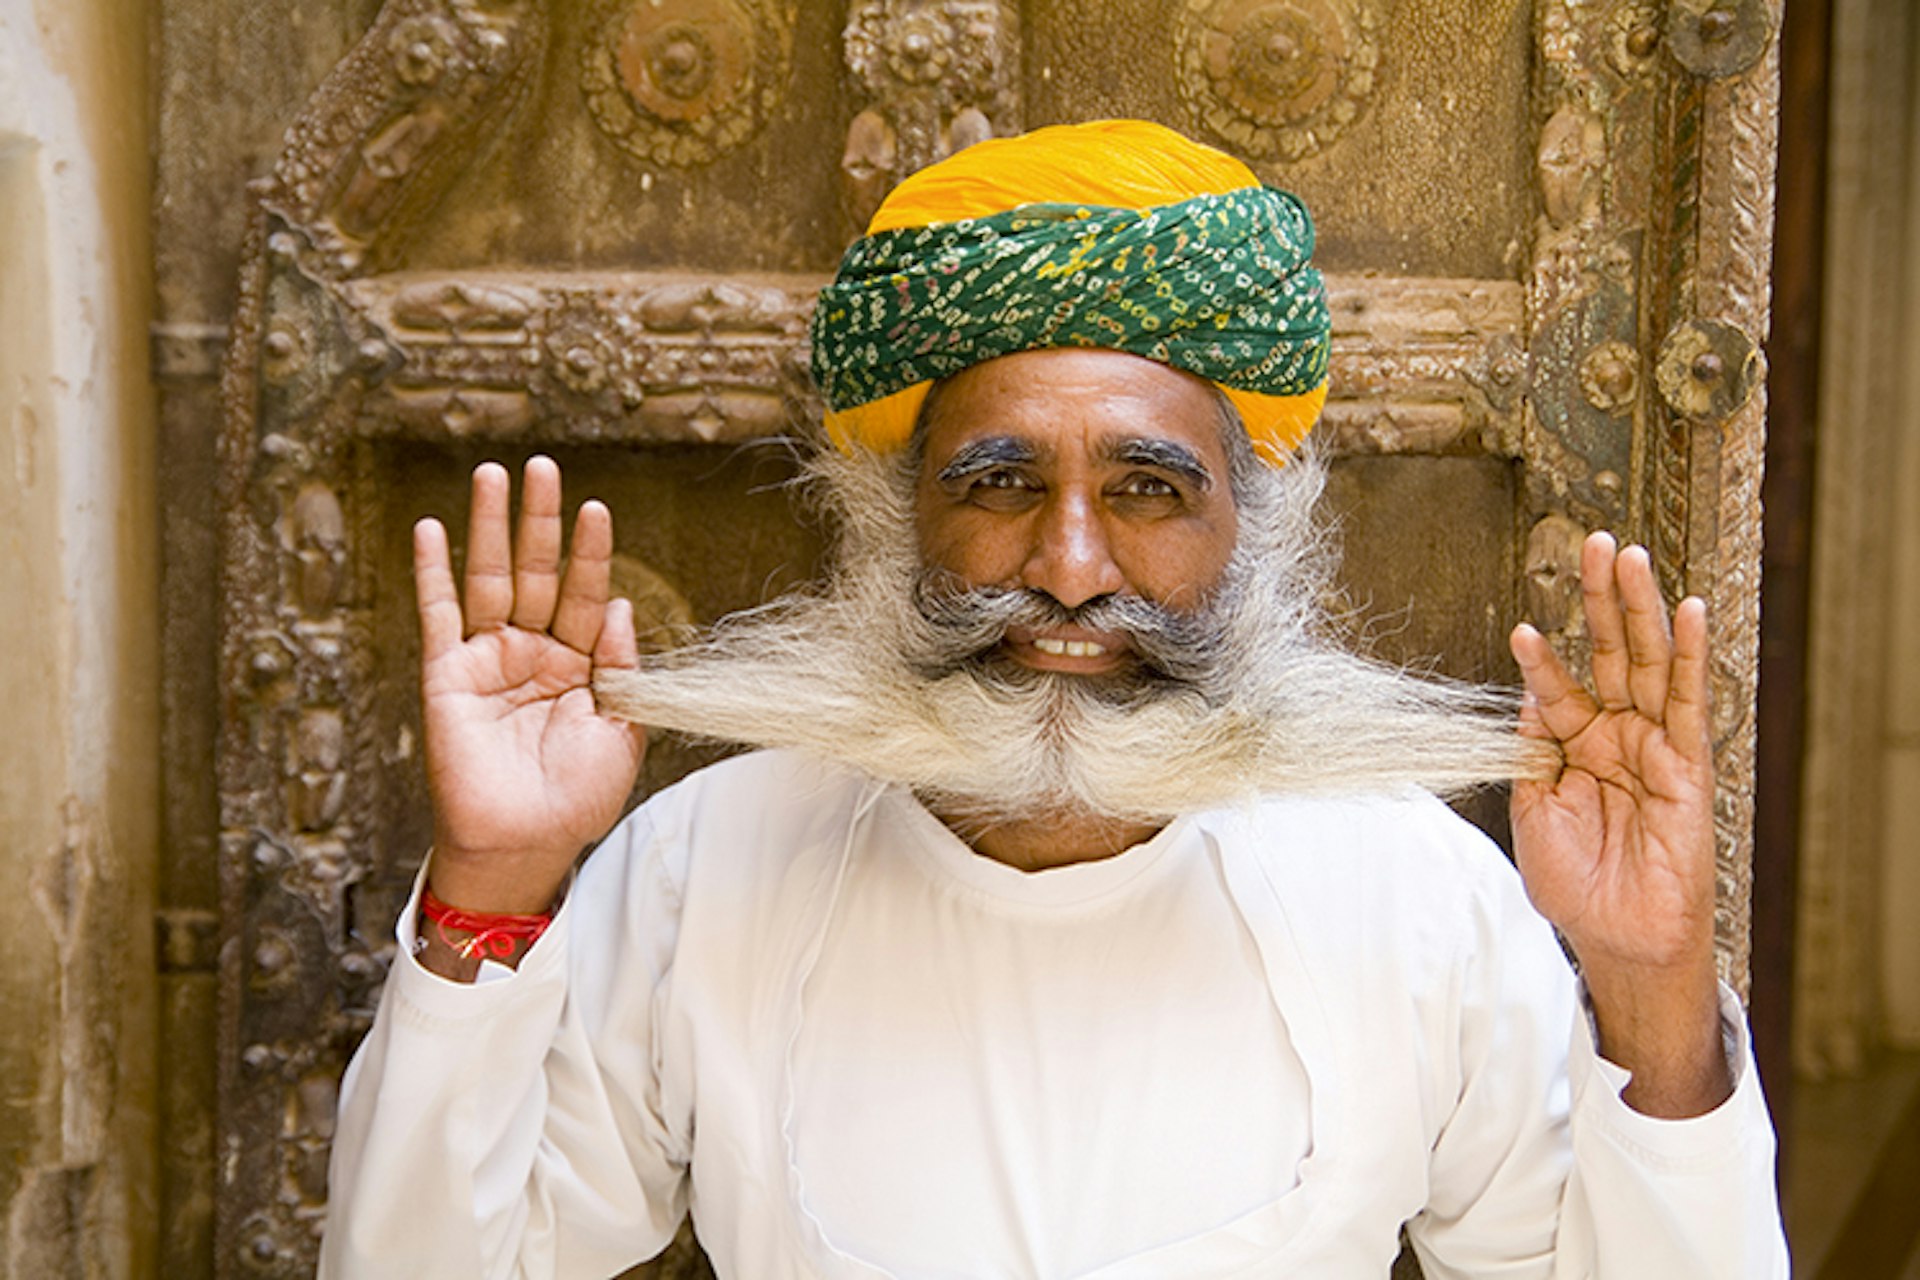 An Indian man proudly shows off his 'stache-beard combo in Jodhpur.